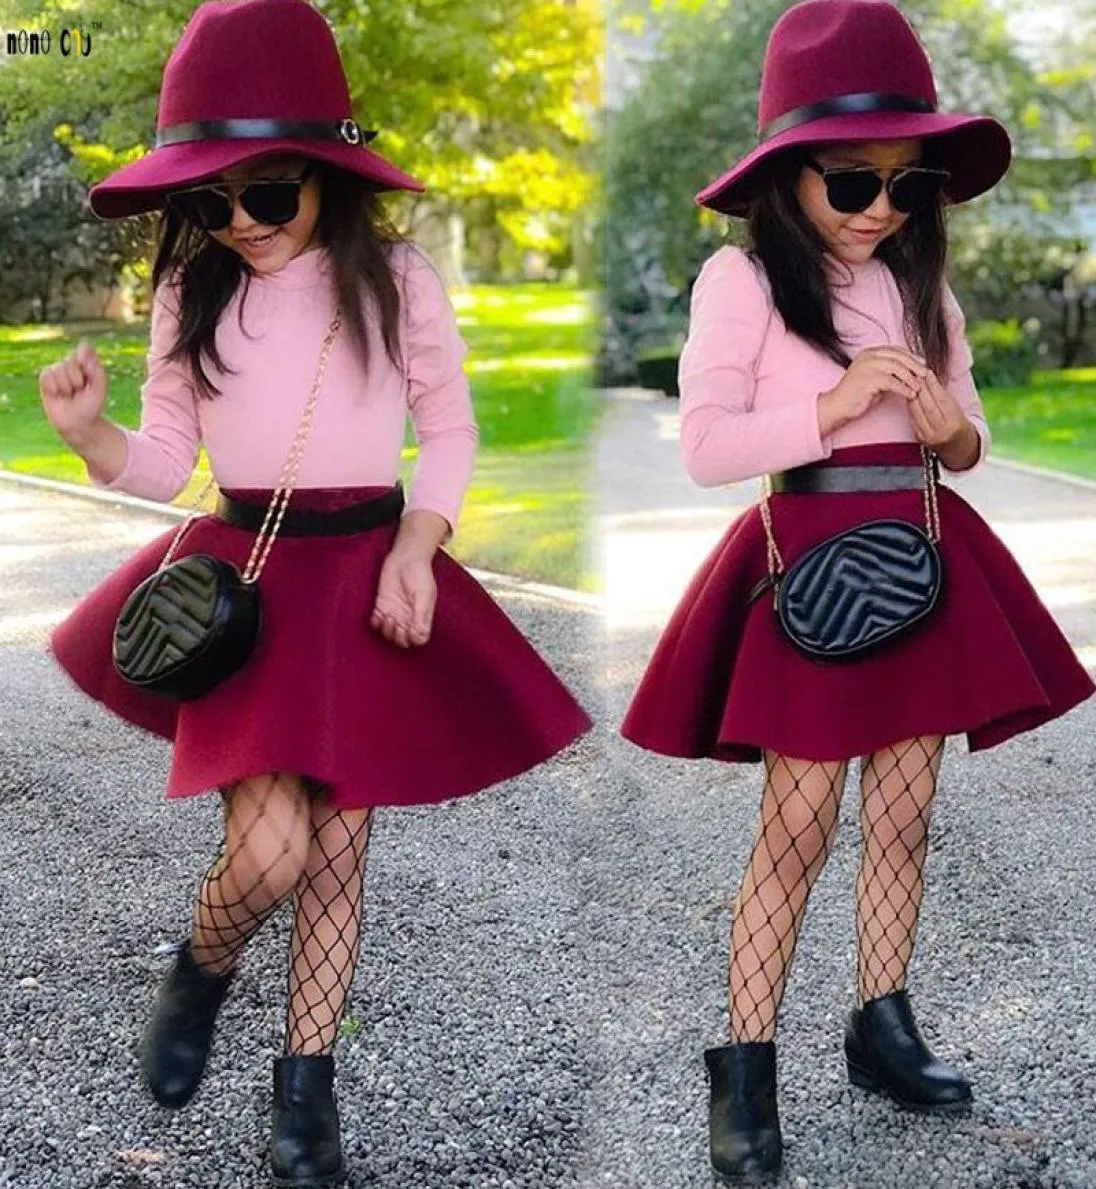 2 Pcs Kids Clothing Sets Girls Long Sleeve Tops Skirt Solid Cute Princess Fall Child Girl Clothes Outfit 3 4 5 6 7 8 Years J19058136473